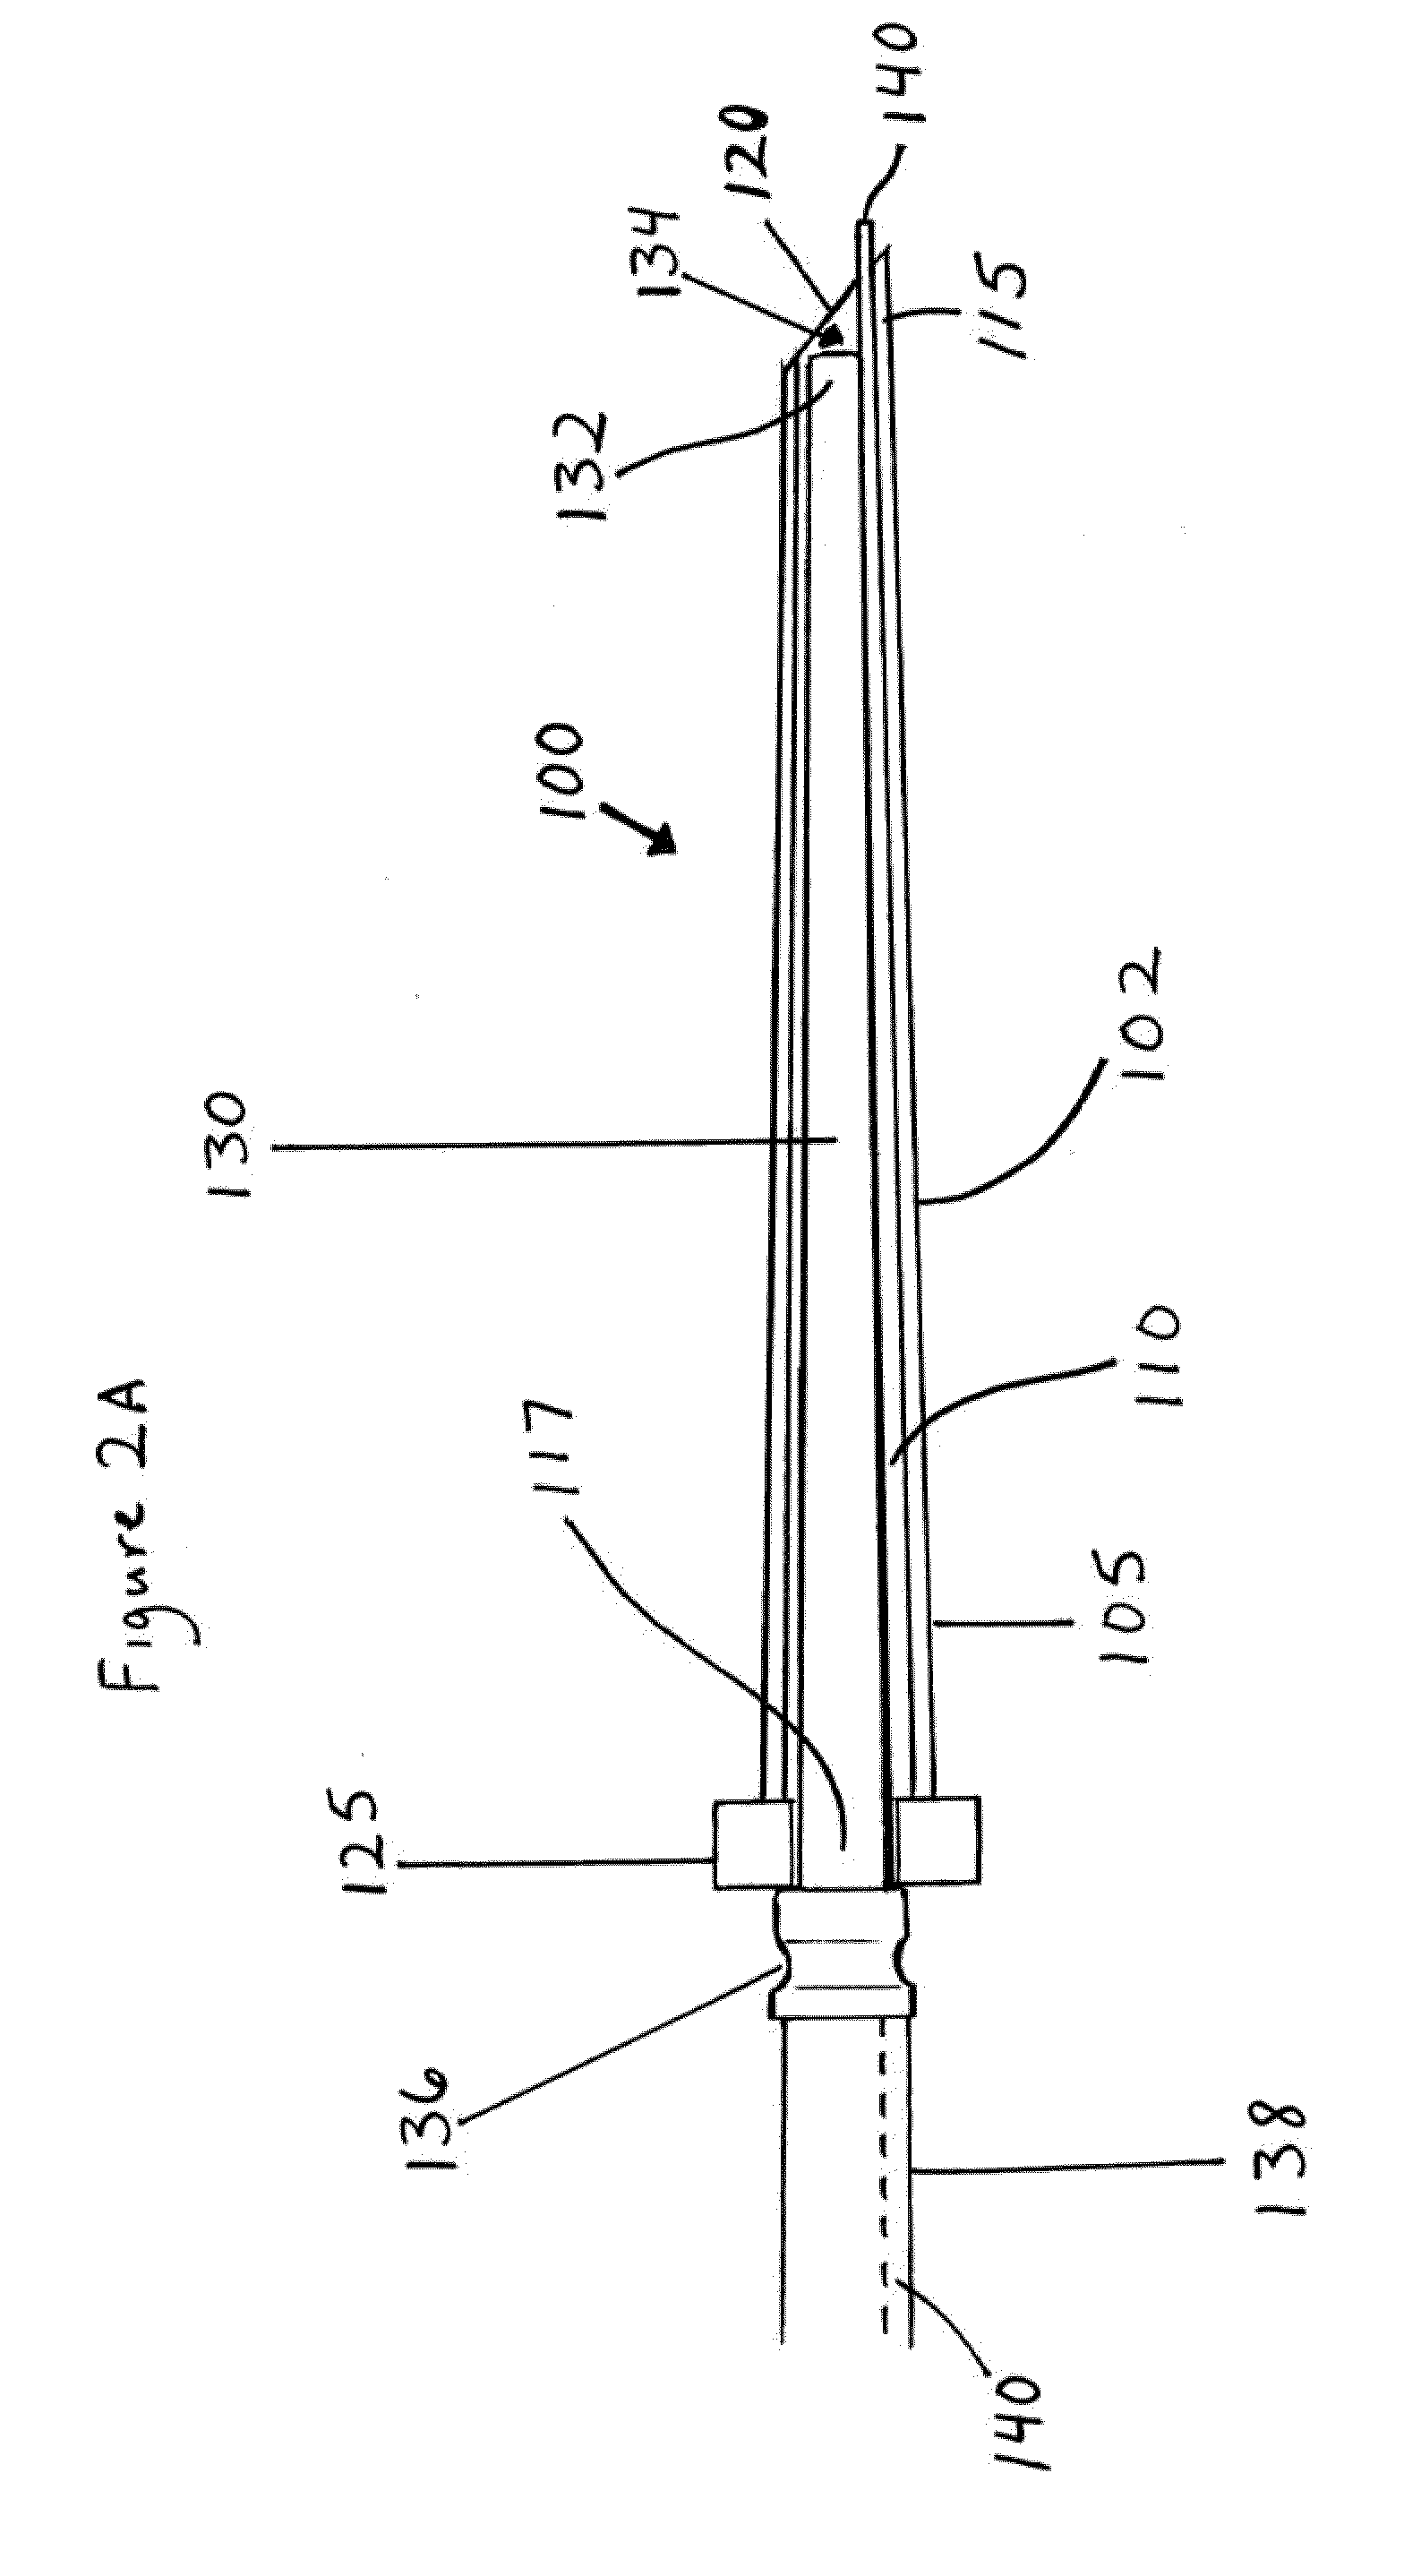 Spinal needle light guide apparatus and method of delivery